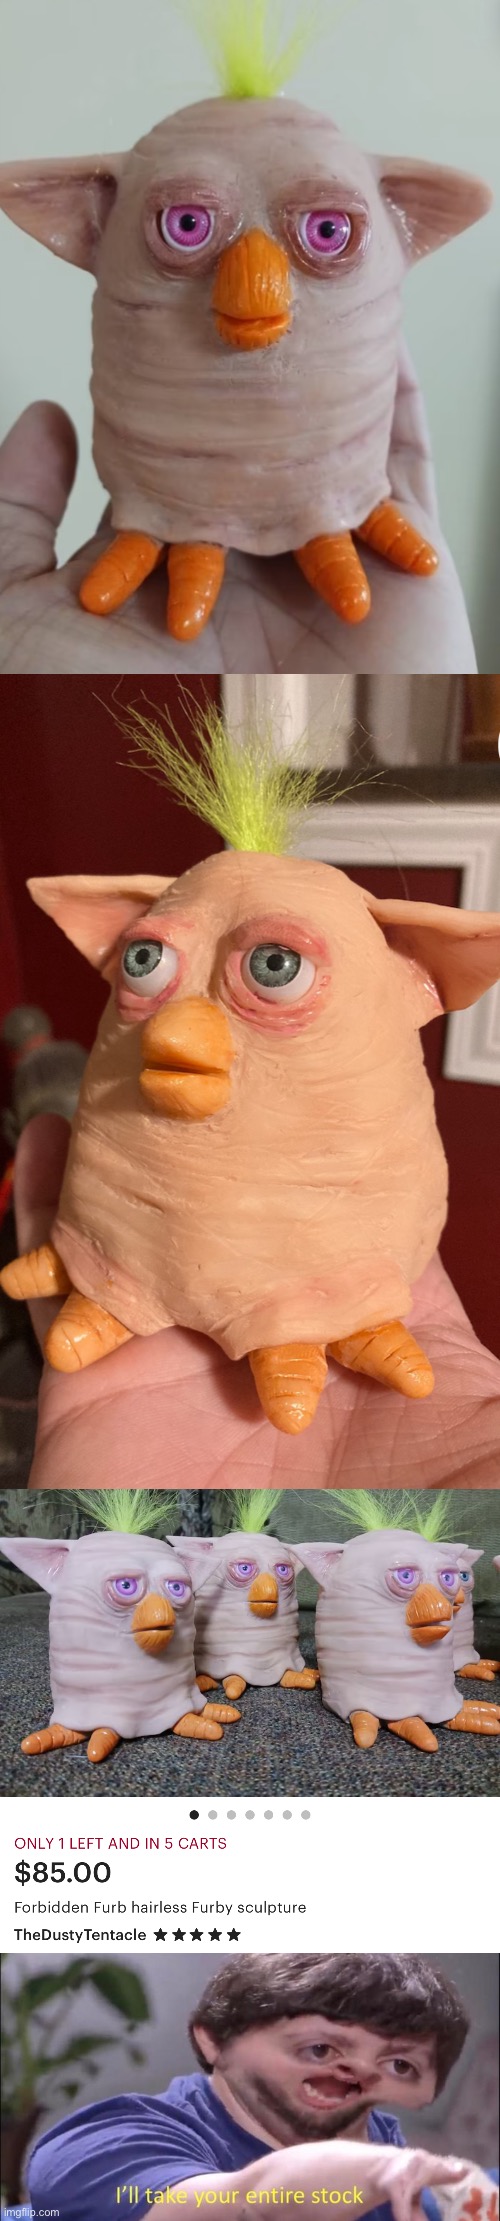 Hairless furbies are more cursed than regular furbies | image tagged in i'll take your entire stock,furby,cursed,can't unsee,pass the unsee juice my bro,unsee | made w/ Imgflip meme maker